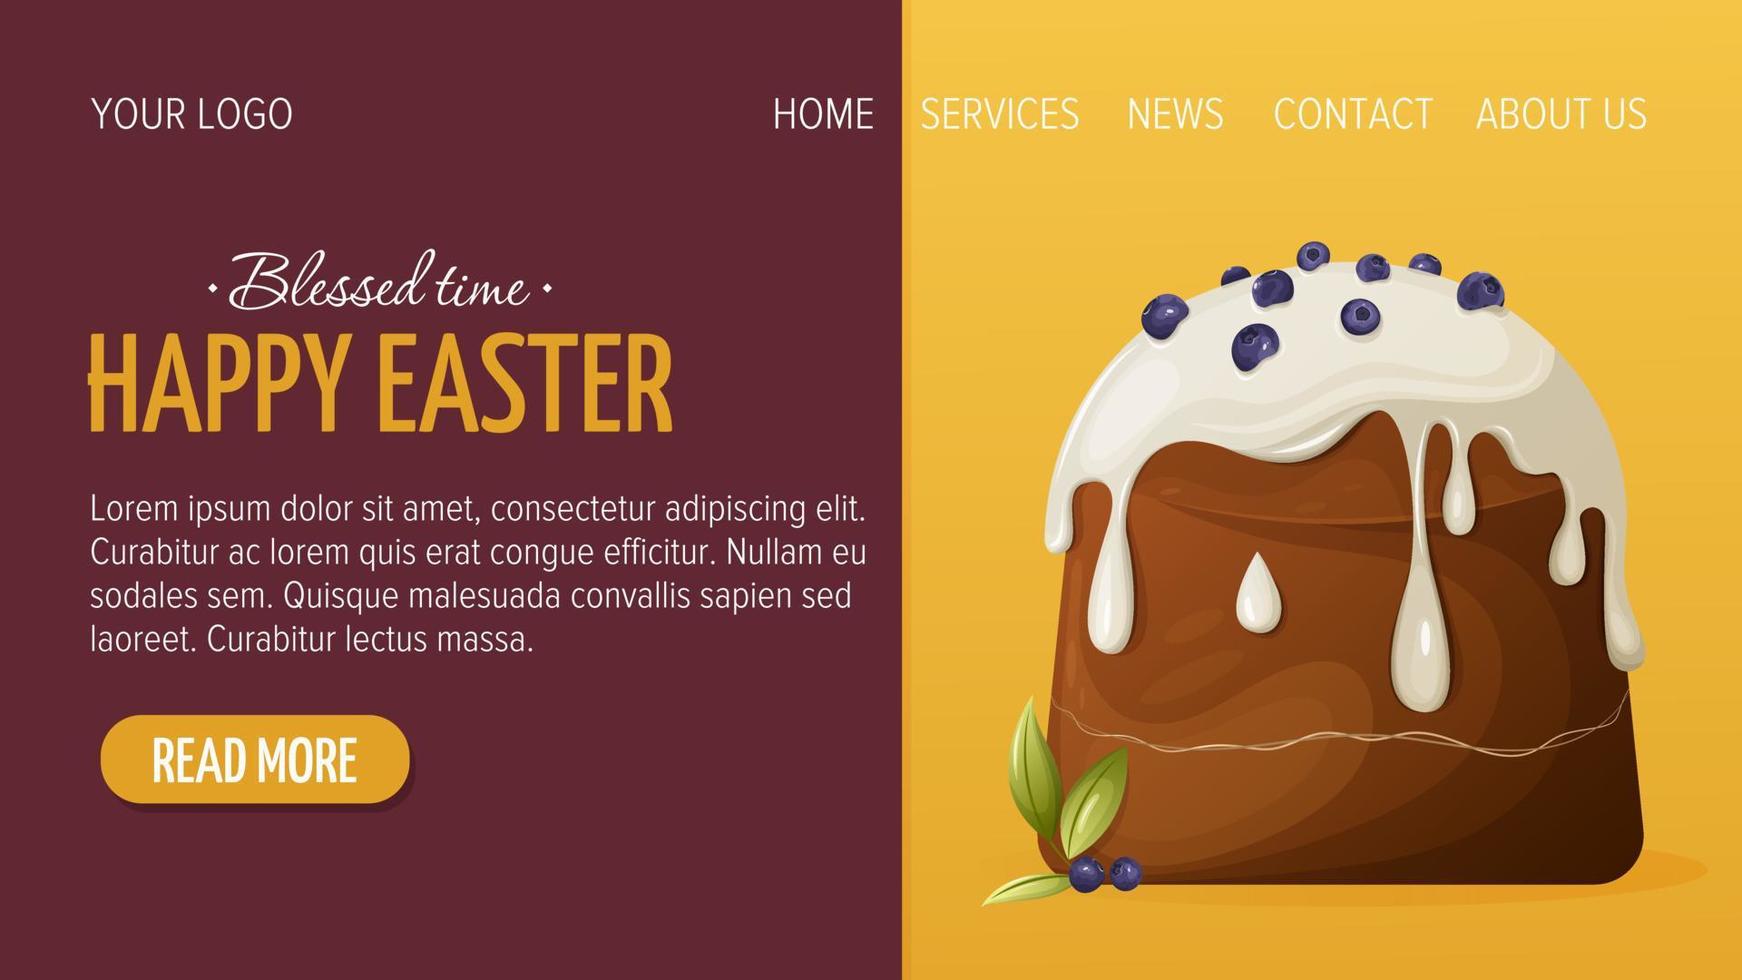 Web page design for Happy Easter. Festive traditional cake with white icing and blueberries. Vector illustration, template for poster, banner, website.